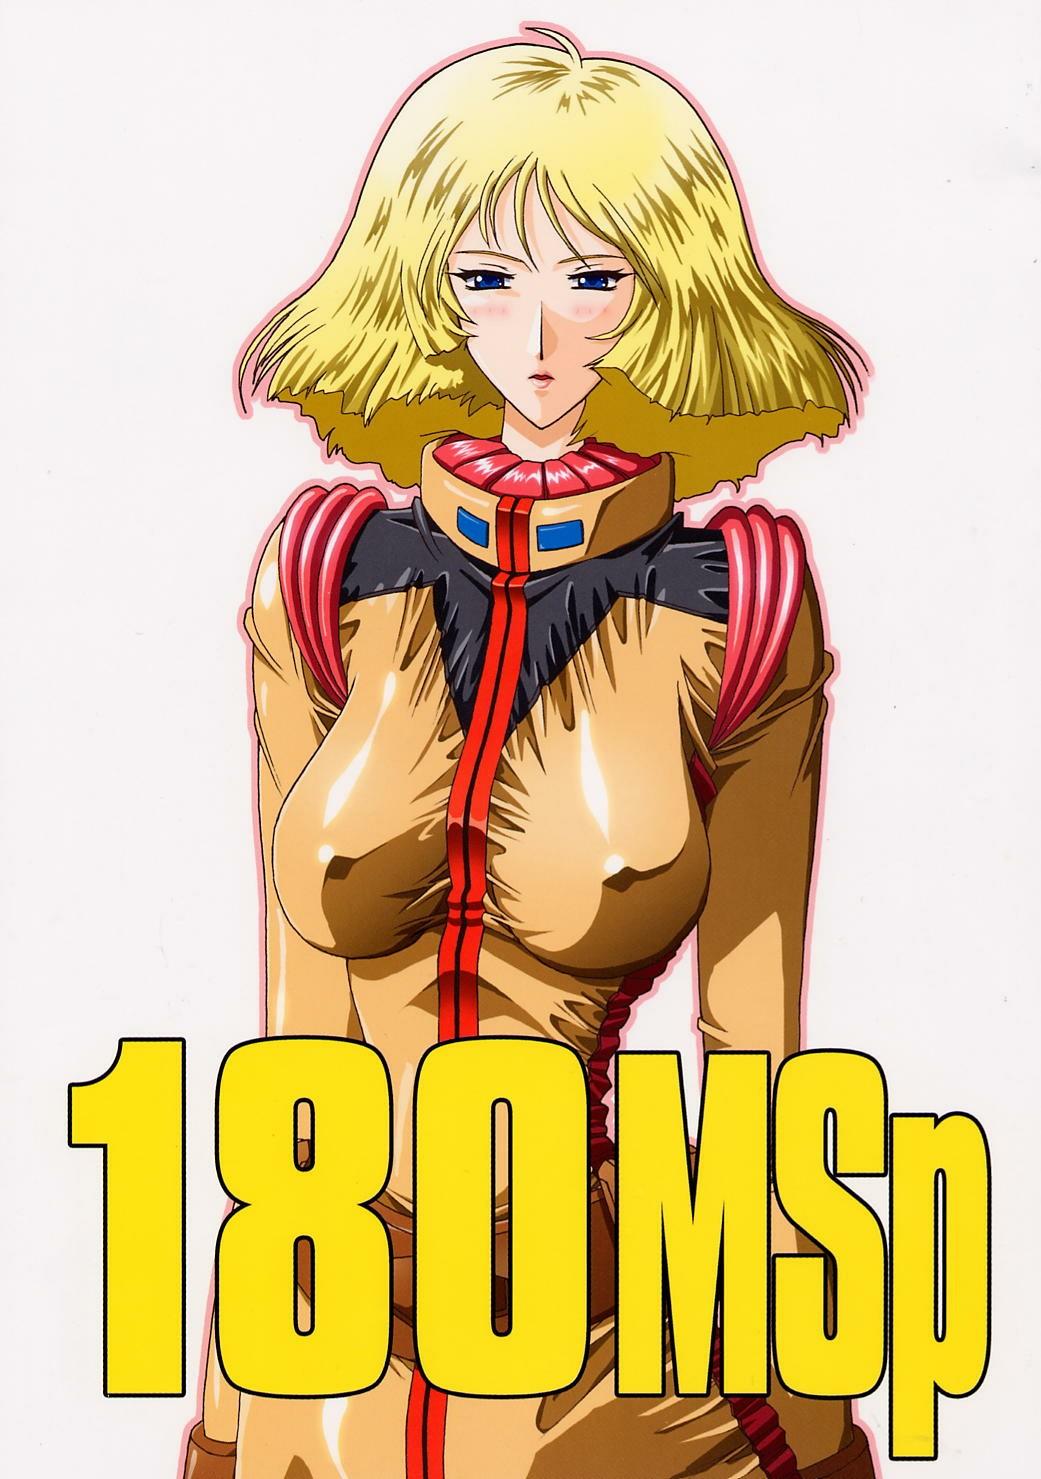 Hot Wife 180MSp - Mobile suit gundam Amante - Picture 1